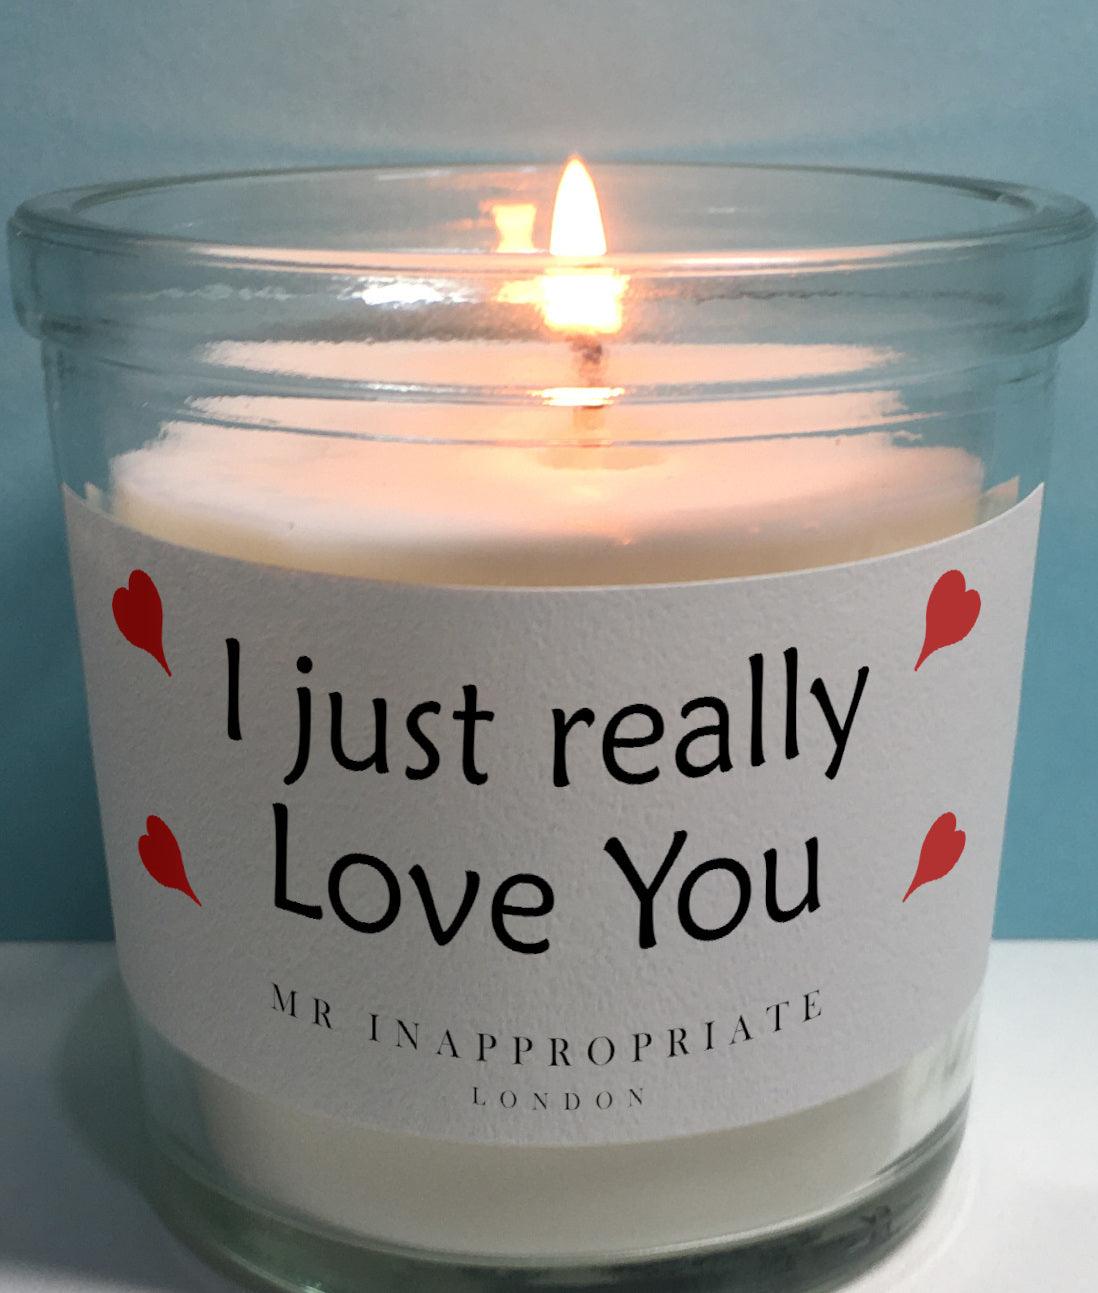 Valentine's Anniversary Candle - Love You - Mr. Inappropriate 